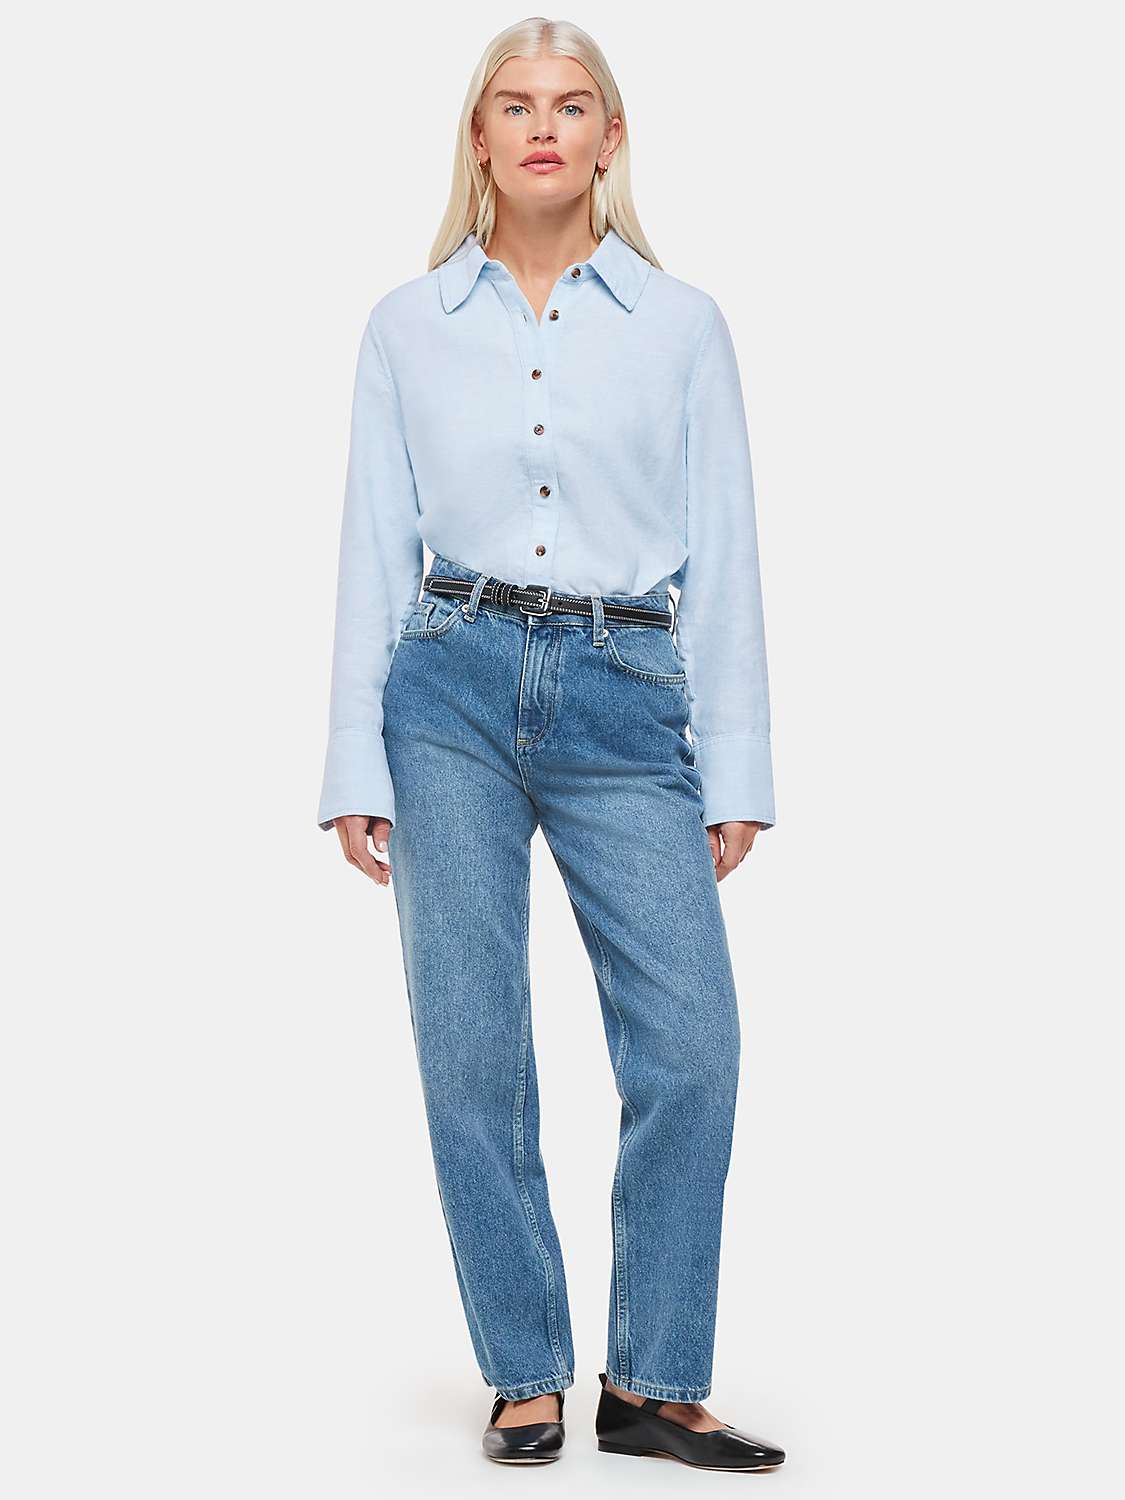 Buy Whistles Petite Relaxed Fit Linen Shirt, Blue Online at johnlewis.com